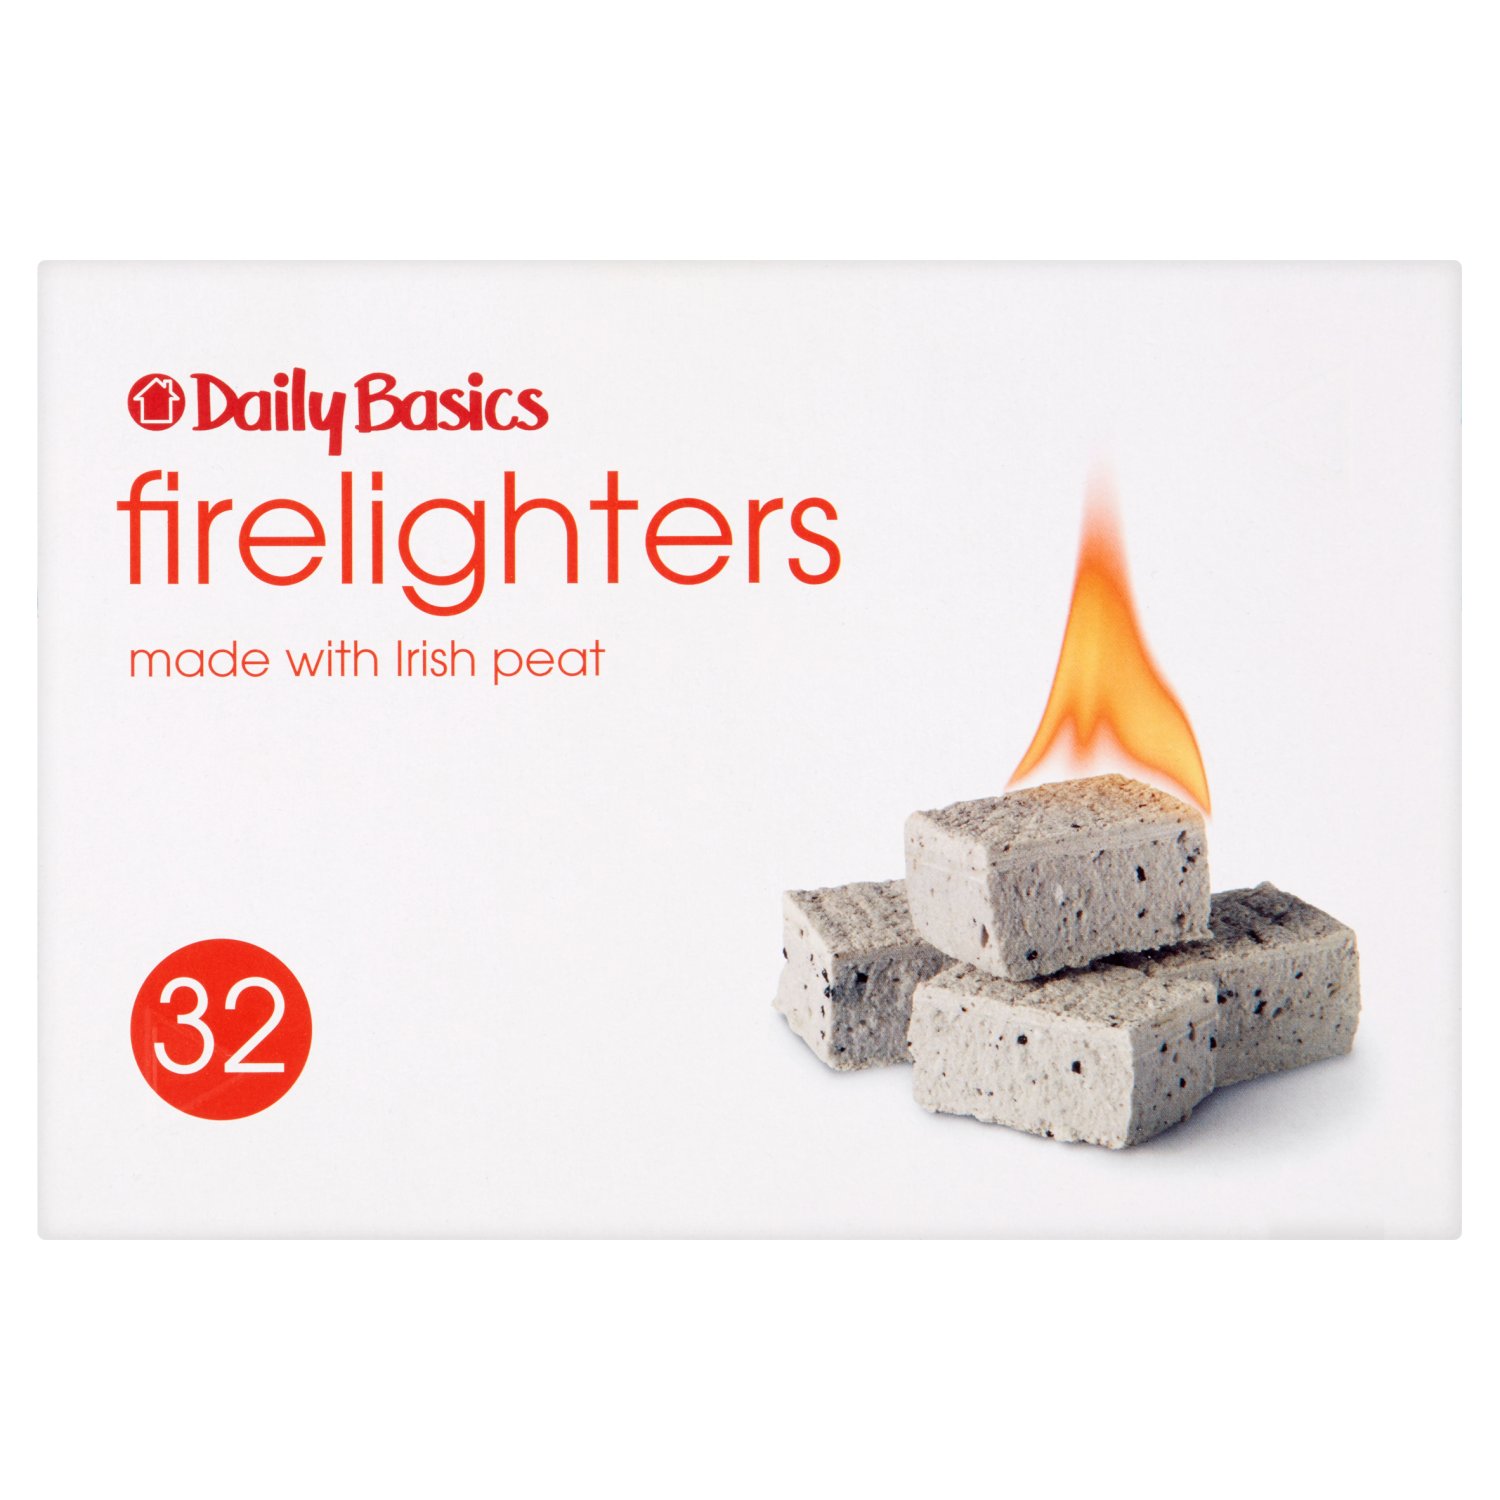 Daily Basics Firelighters 32 Pack (32 Piece)